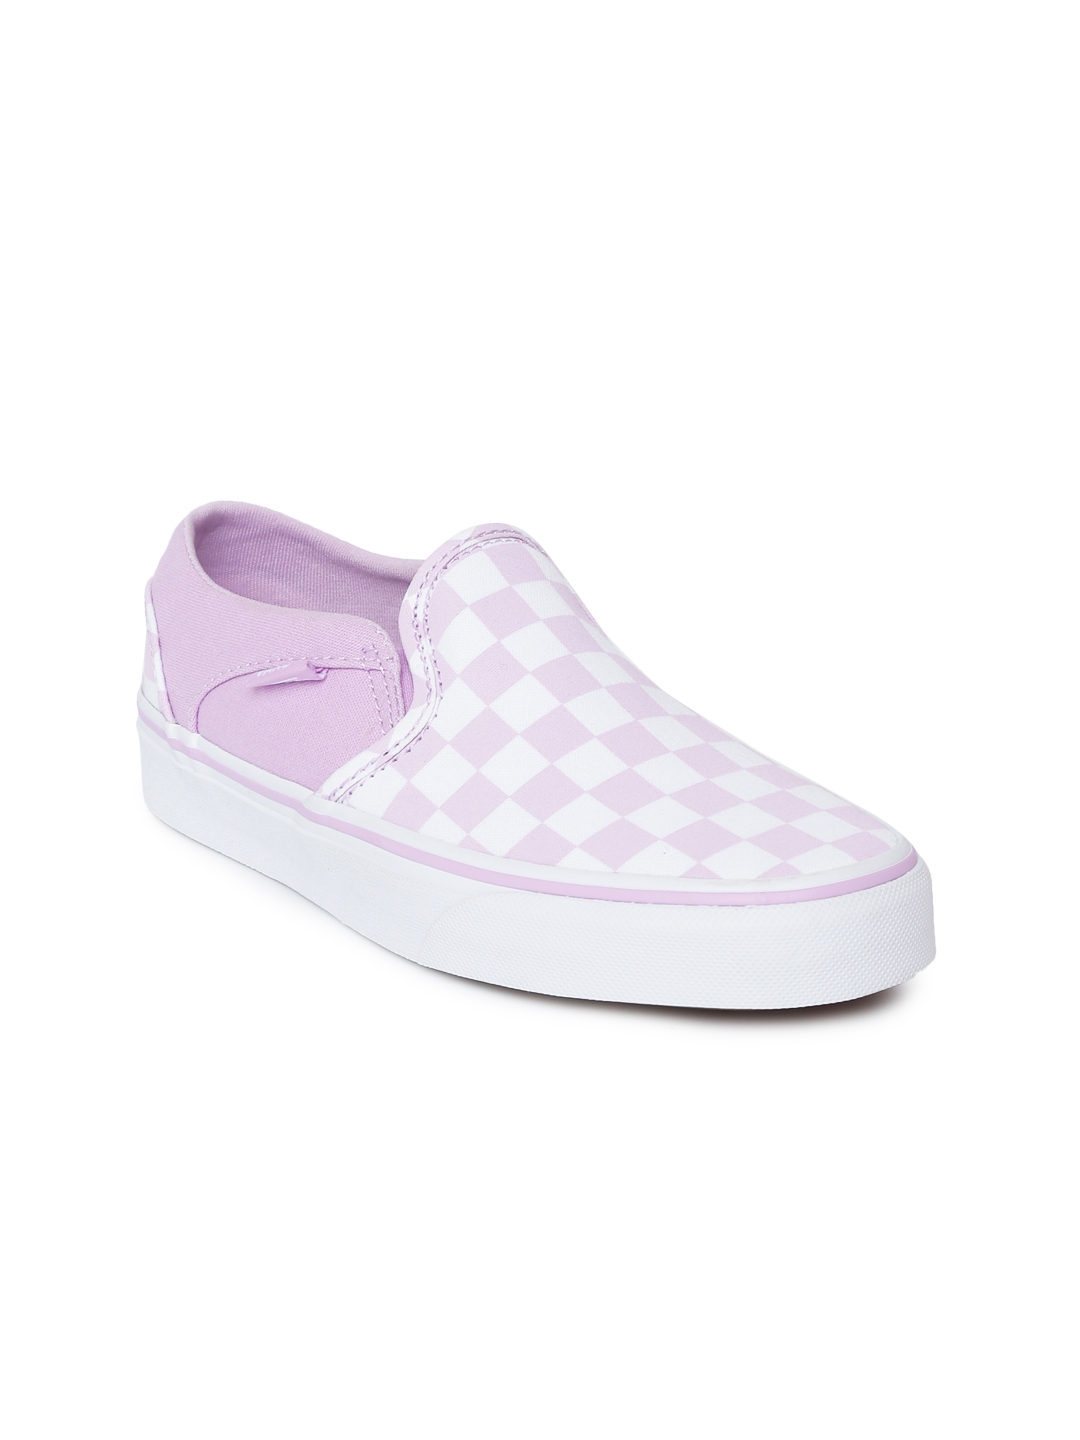 Buy Vans Women Pink & White Asher Checked Slip On Sneakers - Casual ...